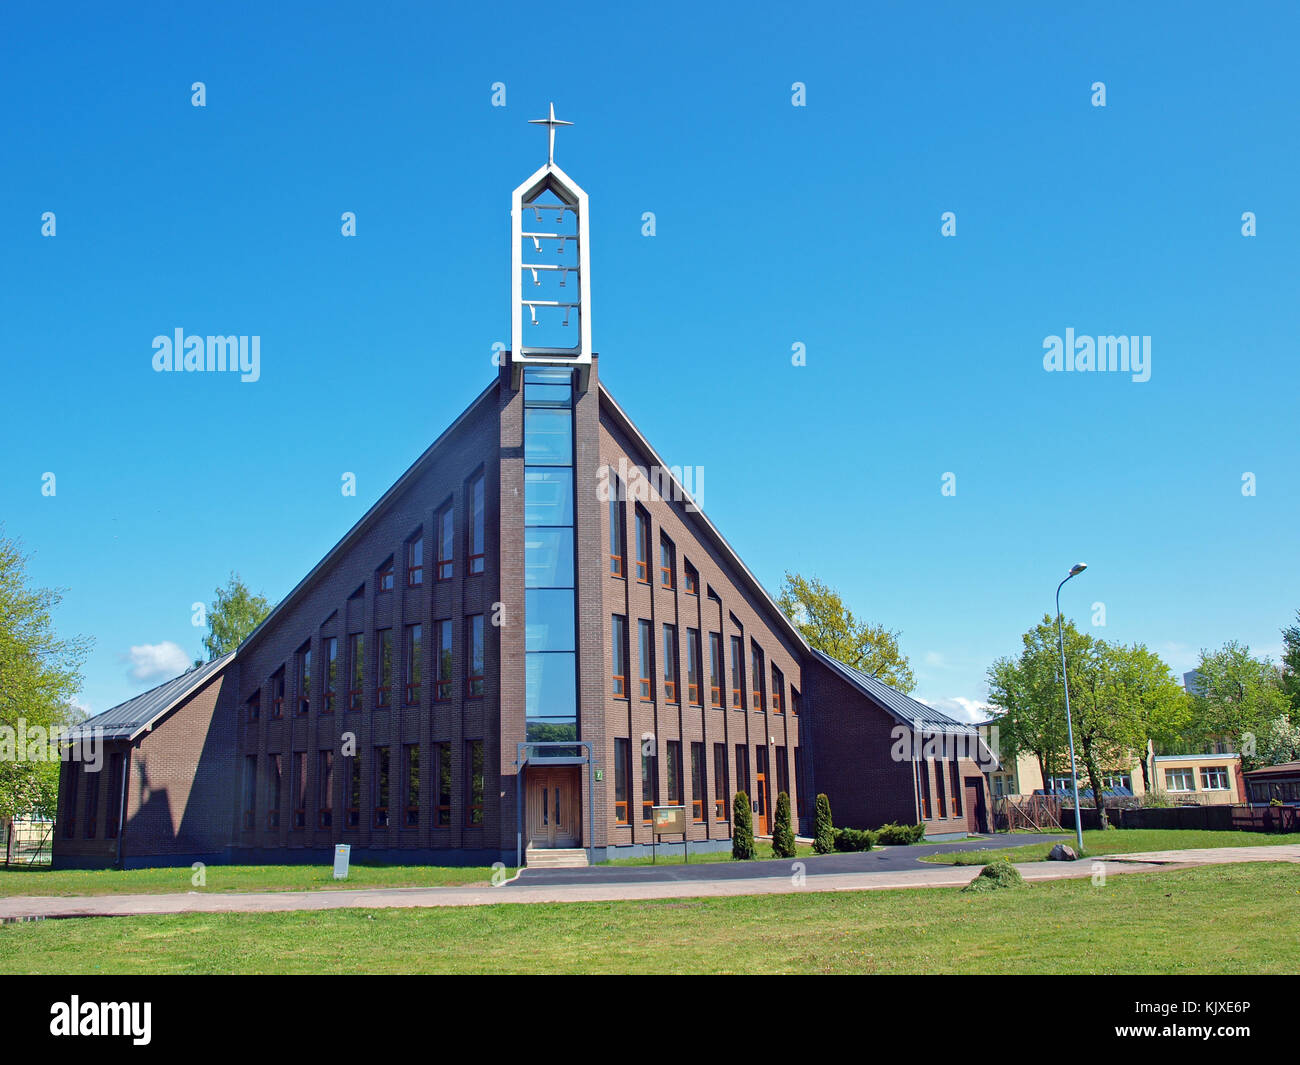 LIEPAJA, LATVIA - MAY 21, 2015: It is completed the construction of new modern architecture style Catholic church. Stock Photo